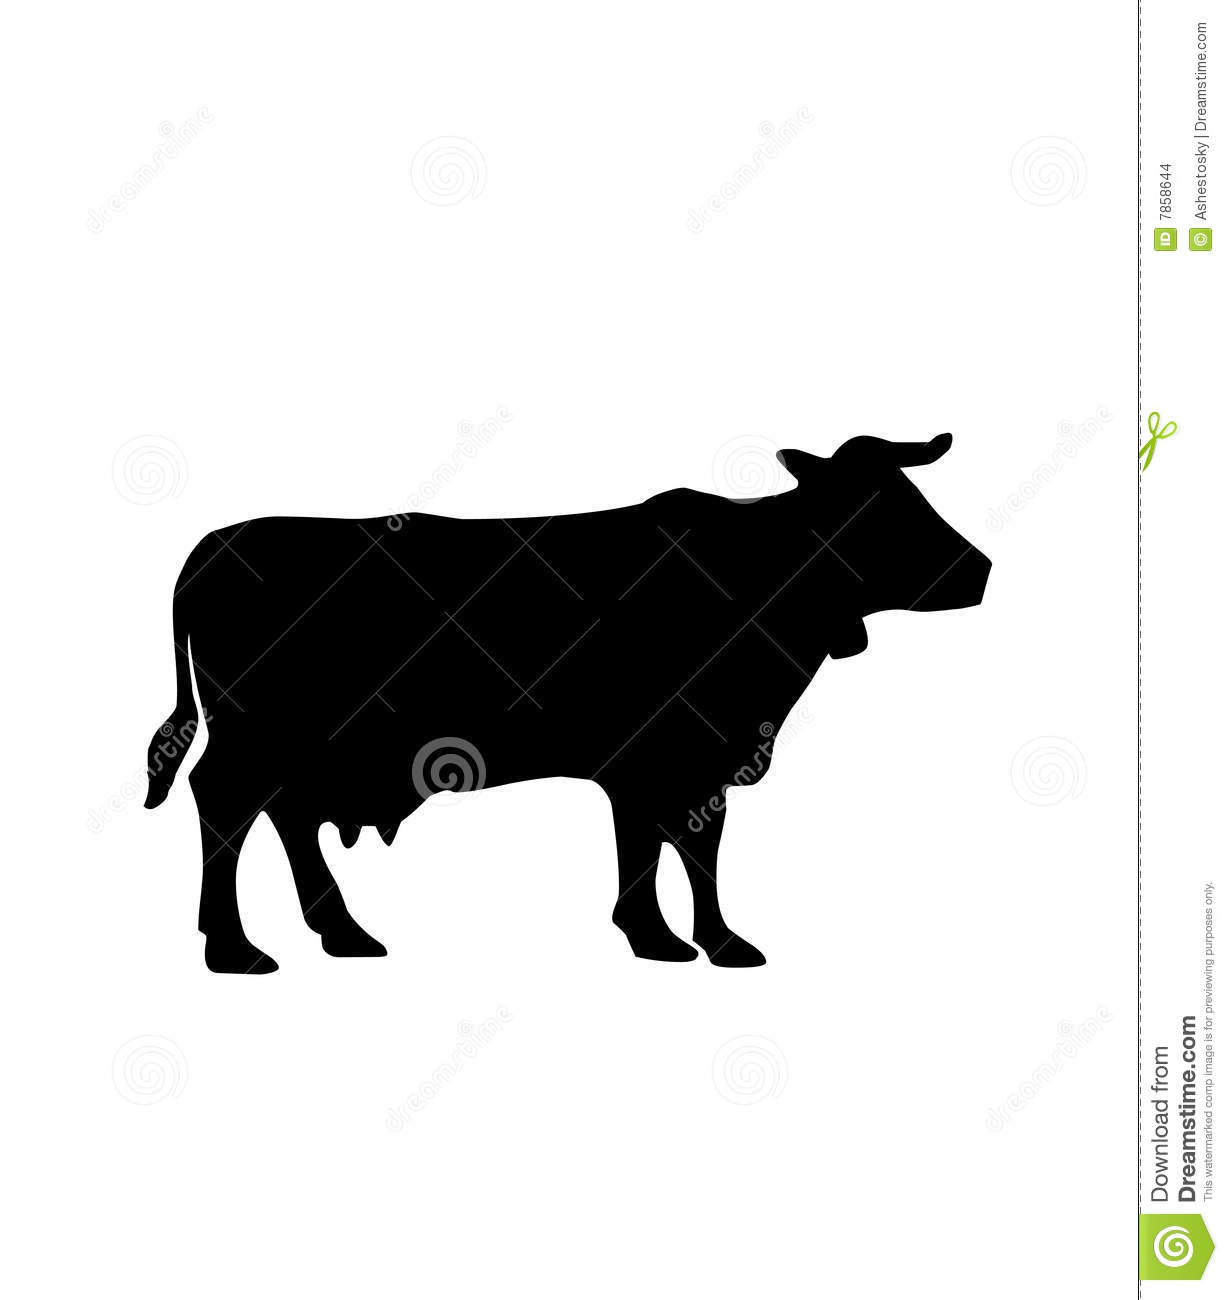 Beef Cow Silhouette Cow Silhouette Vector 7858644 Jpg